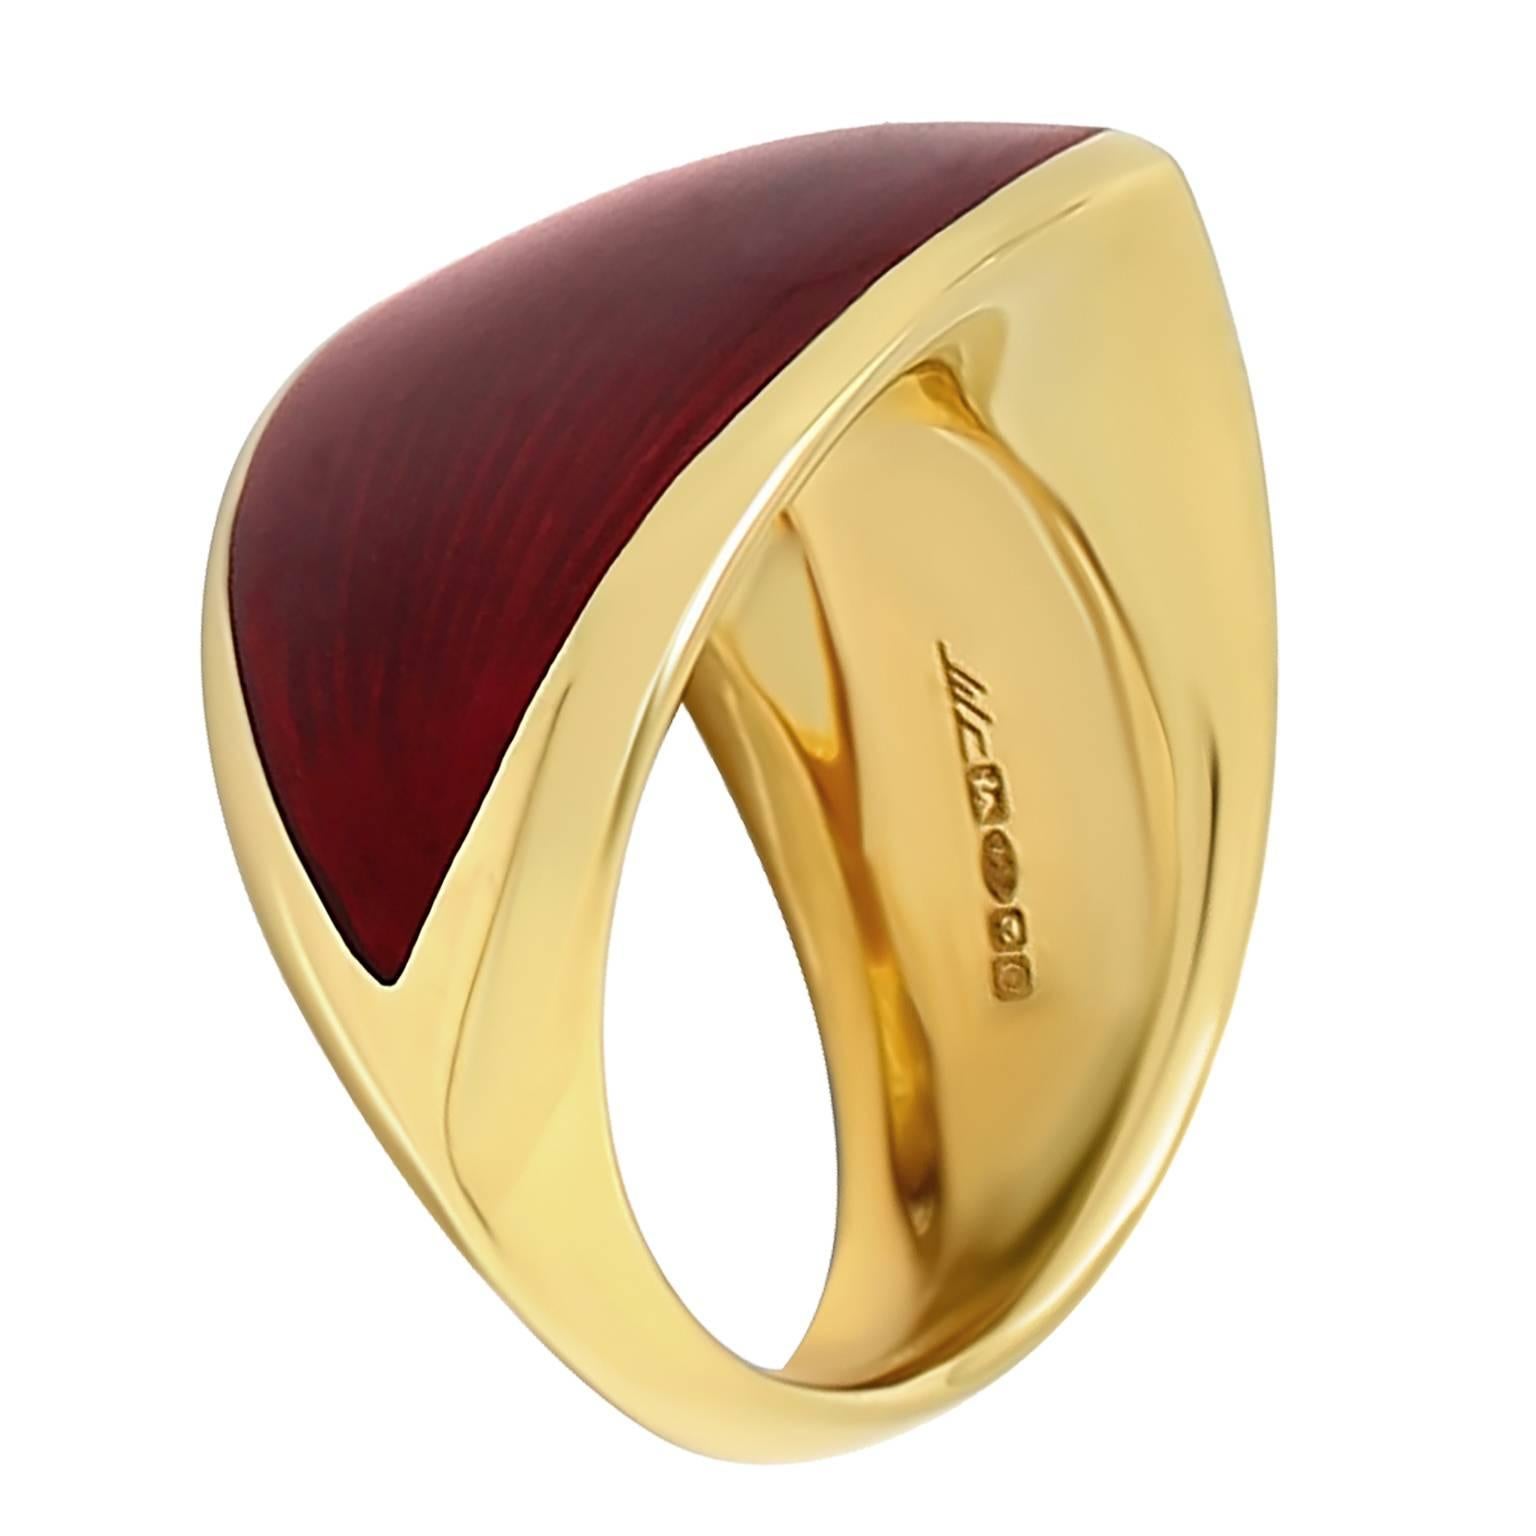 The Libertine ring has become a loved design and continues to be a real favourite. Both bold in colour and size it look amazing on and is very comfortable and tactile.

When the light hits the translucent cold enamel it reflects a strong vibrant